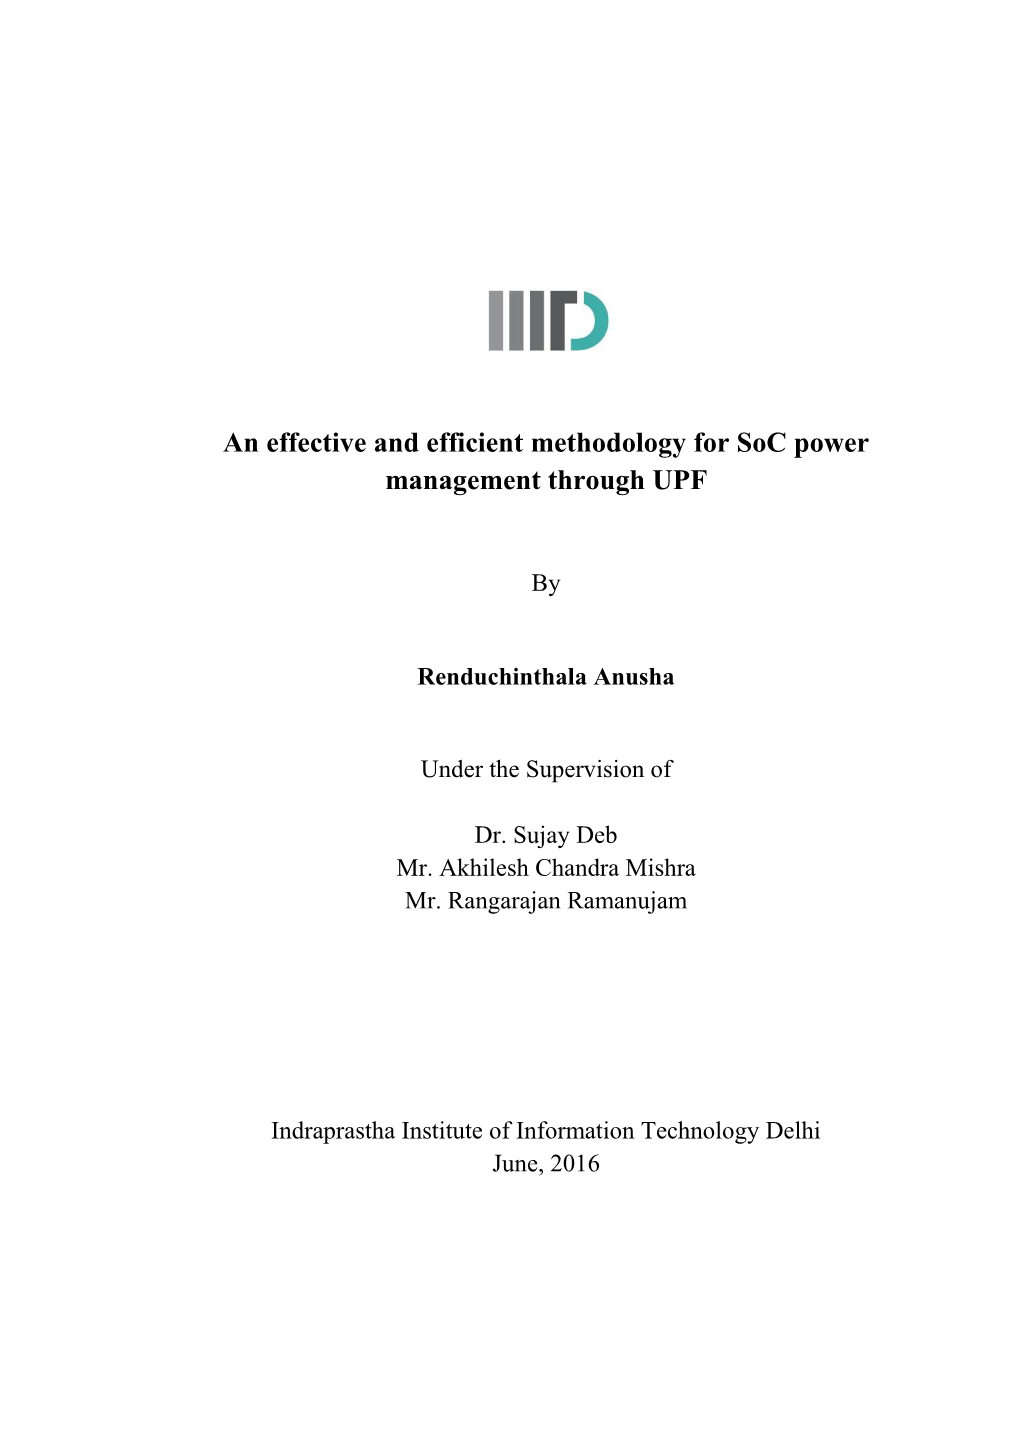 An Effective and Efficient Methodology for Soc Power Management Through UPF